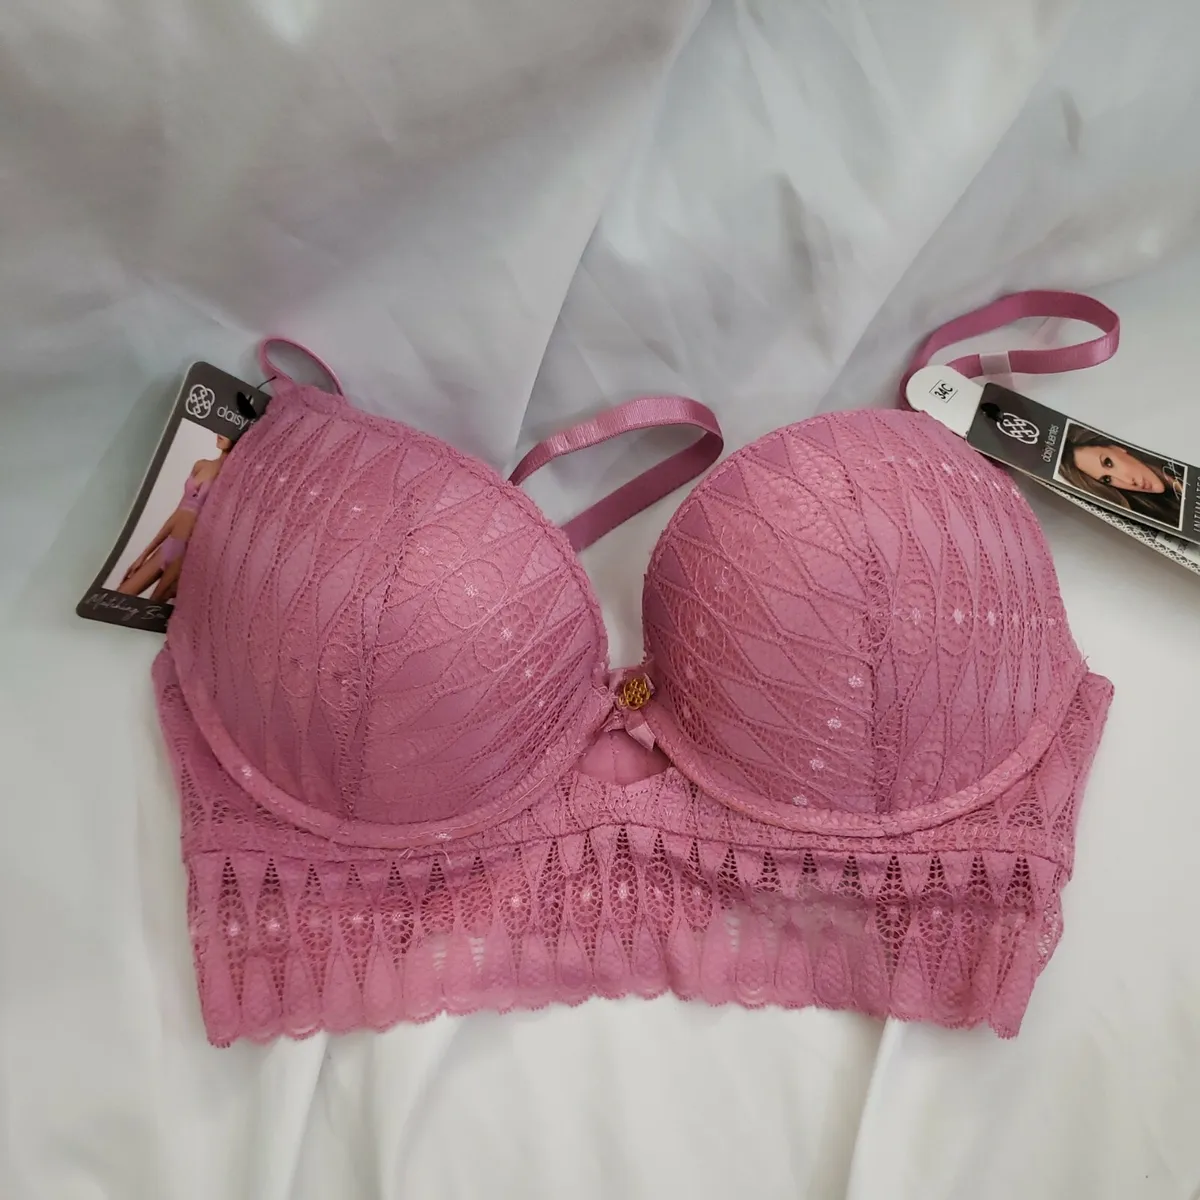 NWT Daisy Fuentes Women's Long Line Bra Push Up Rose Pink